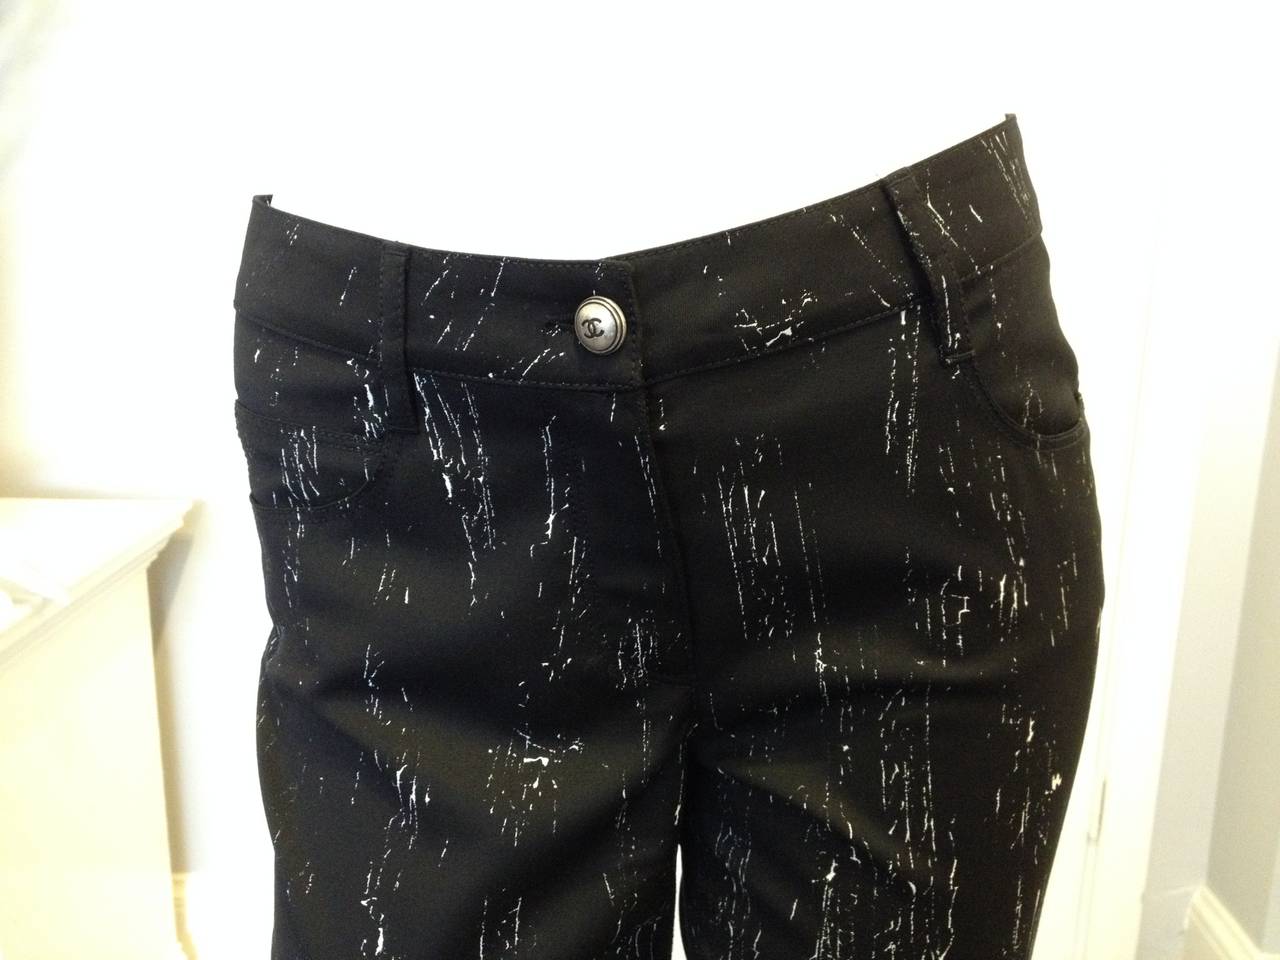 Easy but unusual - these Chanel pants are just ideal to replace your jeans any day of the week. Crisp black fabric is splattered with a subtle but interesting pattern of fine white lines. The cut is skinny and cropped to an ankle length, featuring